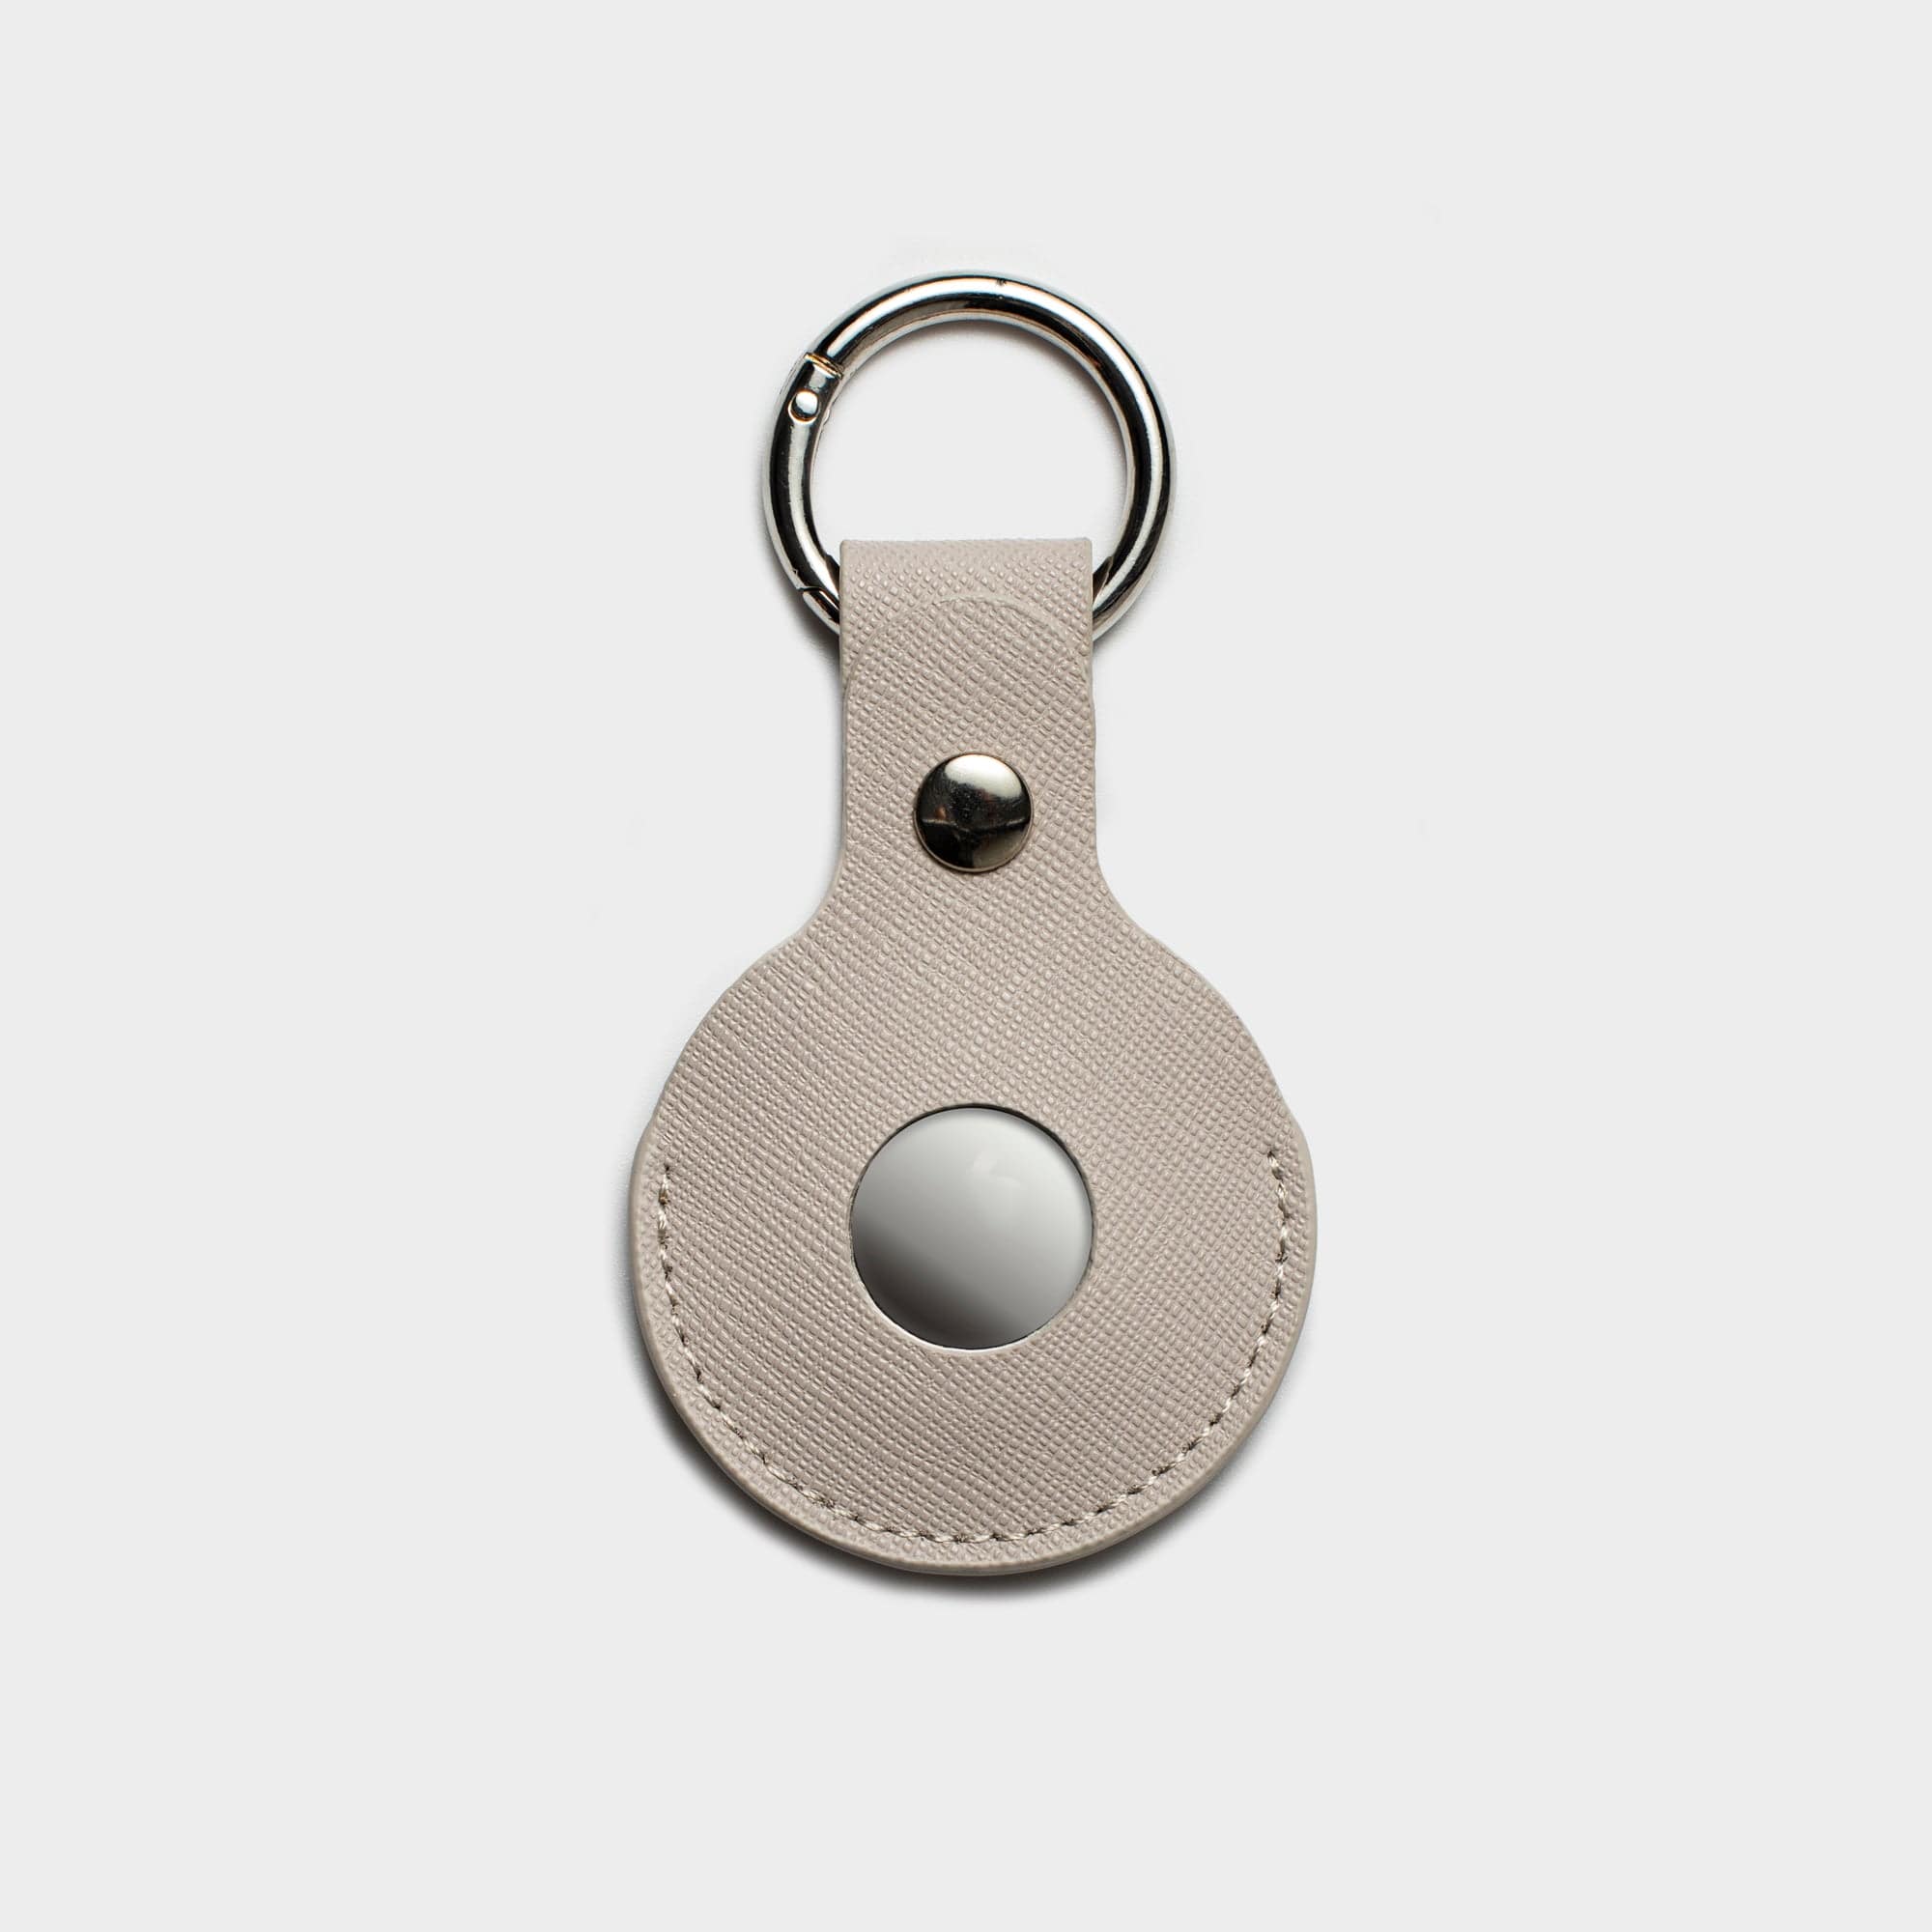 Dove Grey Saffiano Leather Personalized Airtag Keyring